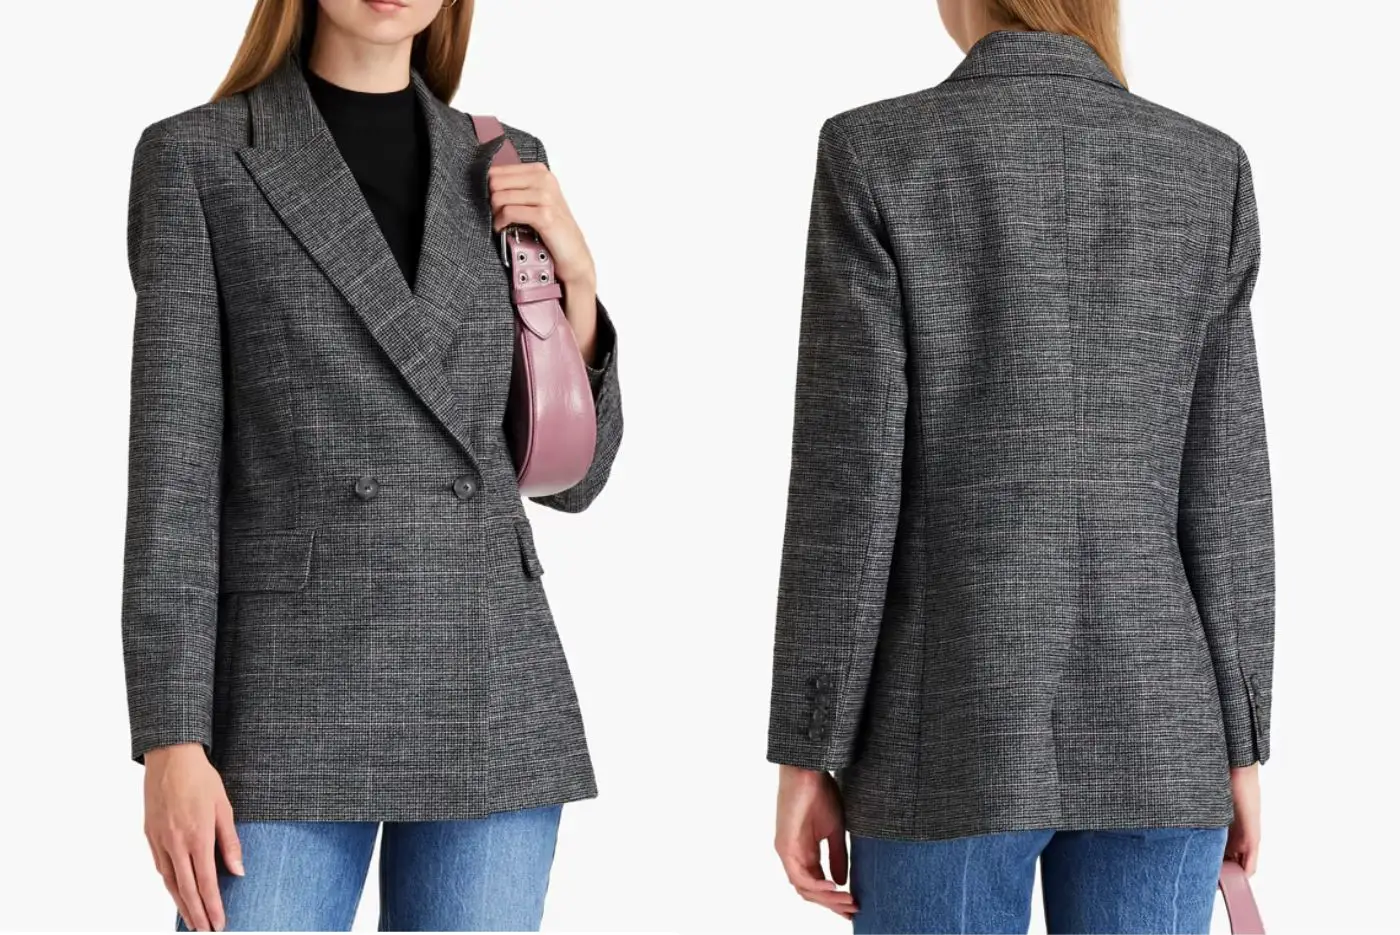 Kate Middleton, The Princess of Wales, wore Maje Double-breasted houndstooth tweed blazer